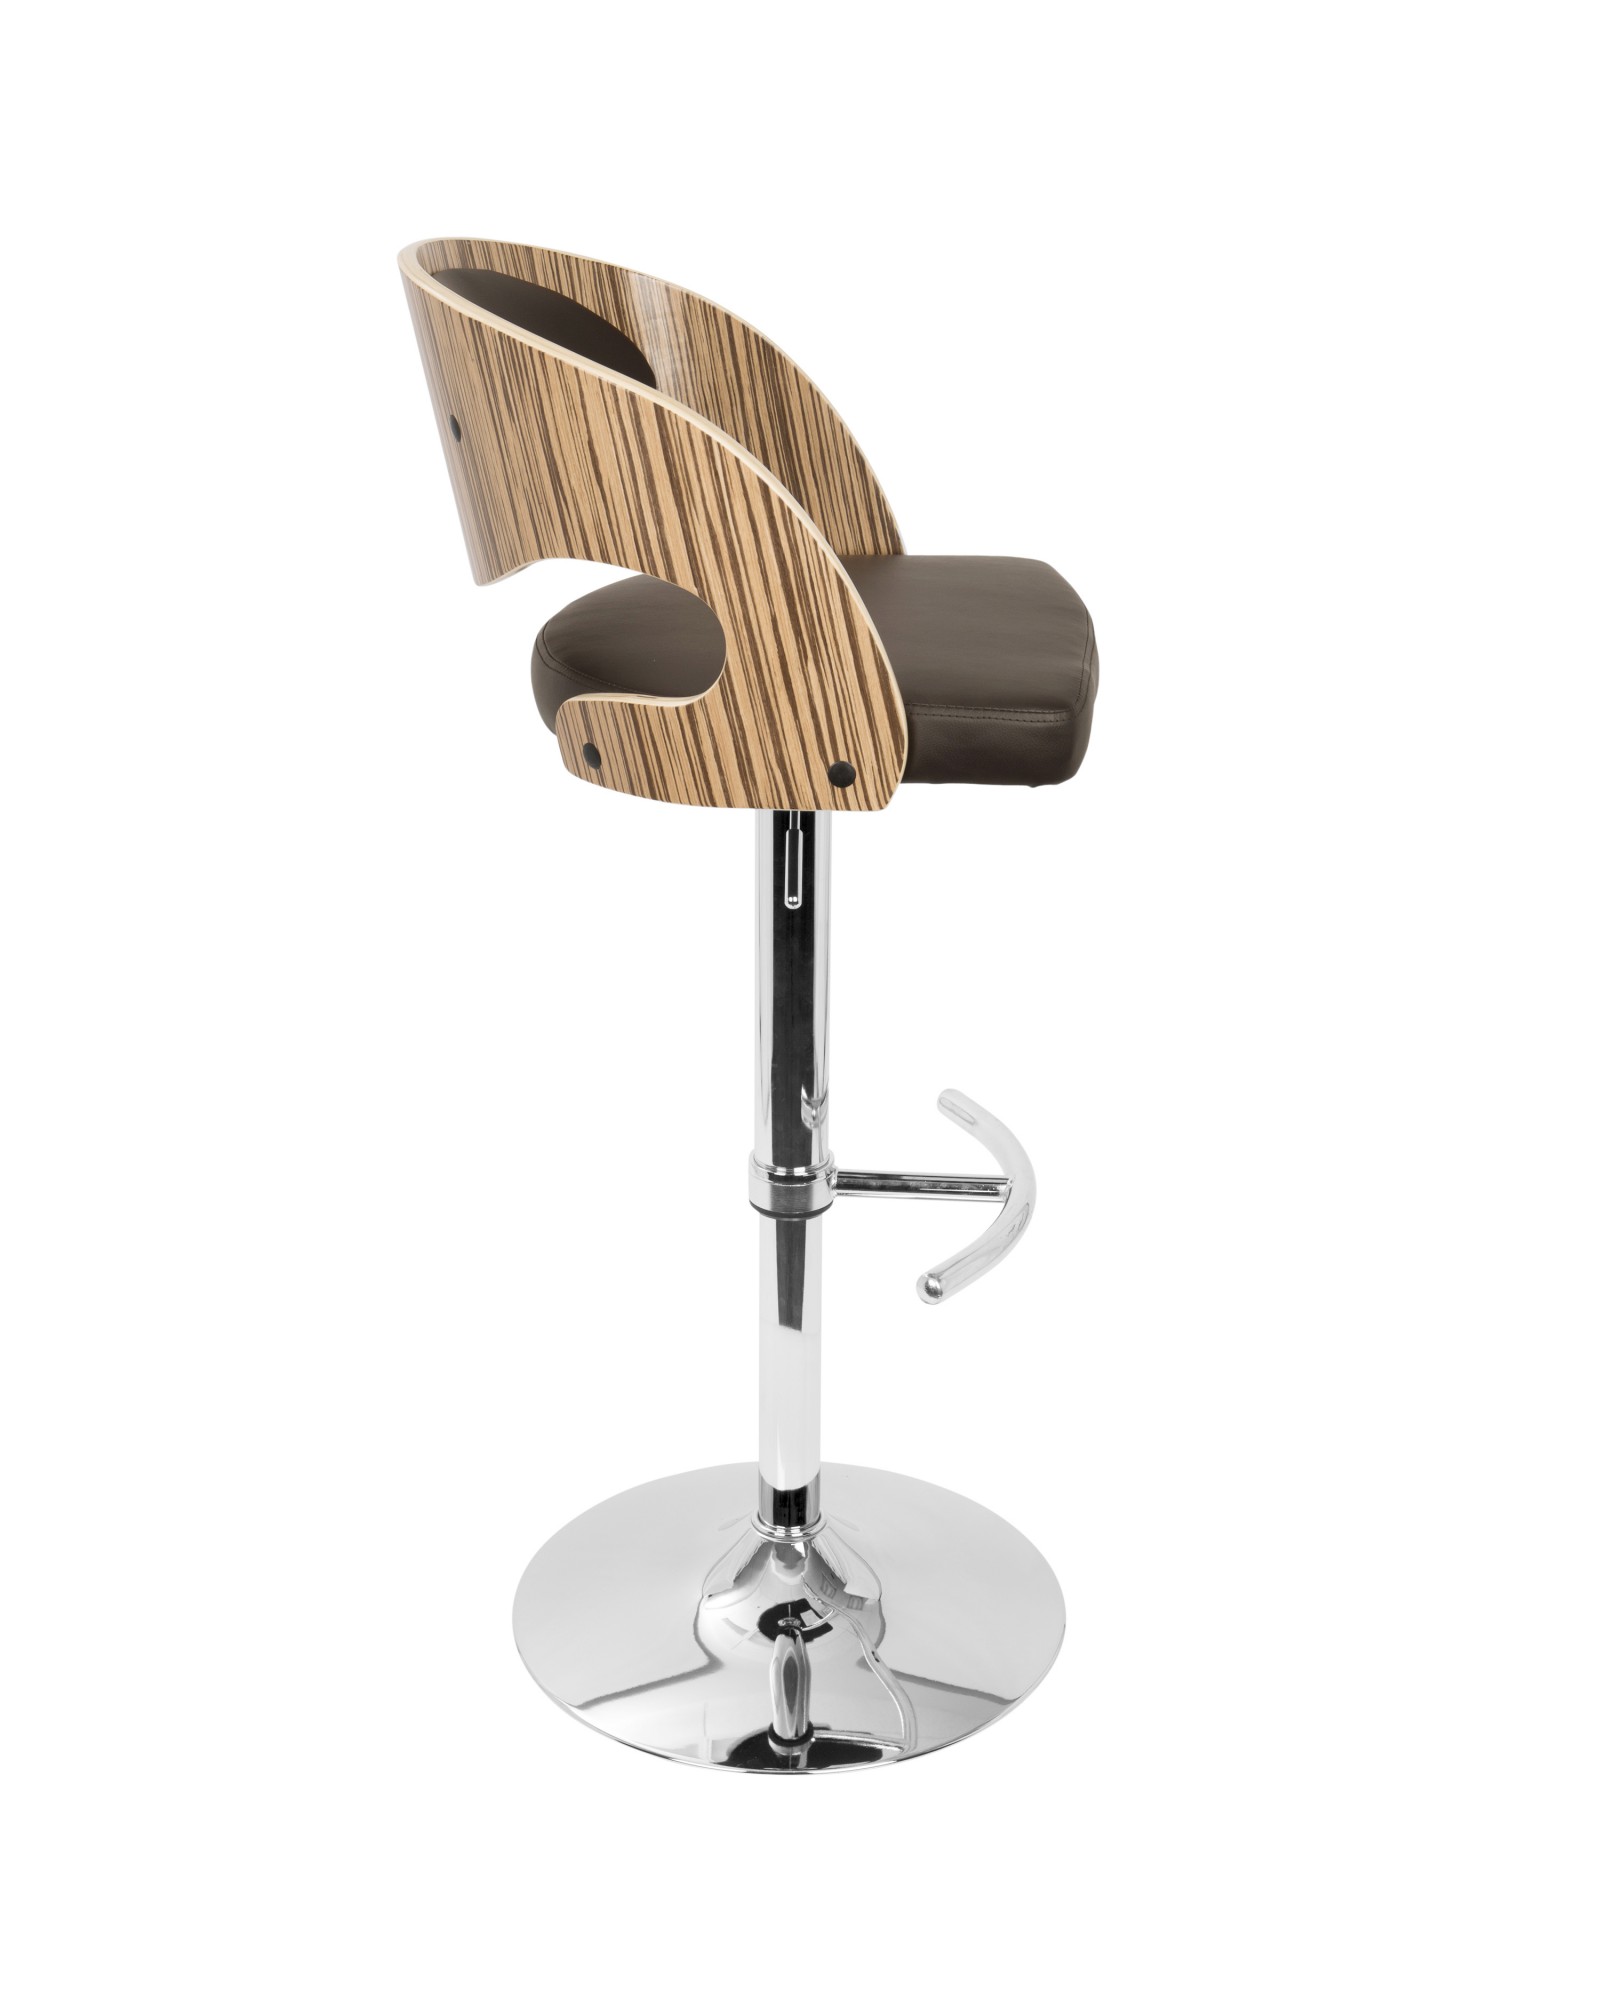 Pino Mid-Century Modern Adjustable Barstool with Swivel in Zebra and Brown Faux Leather